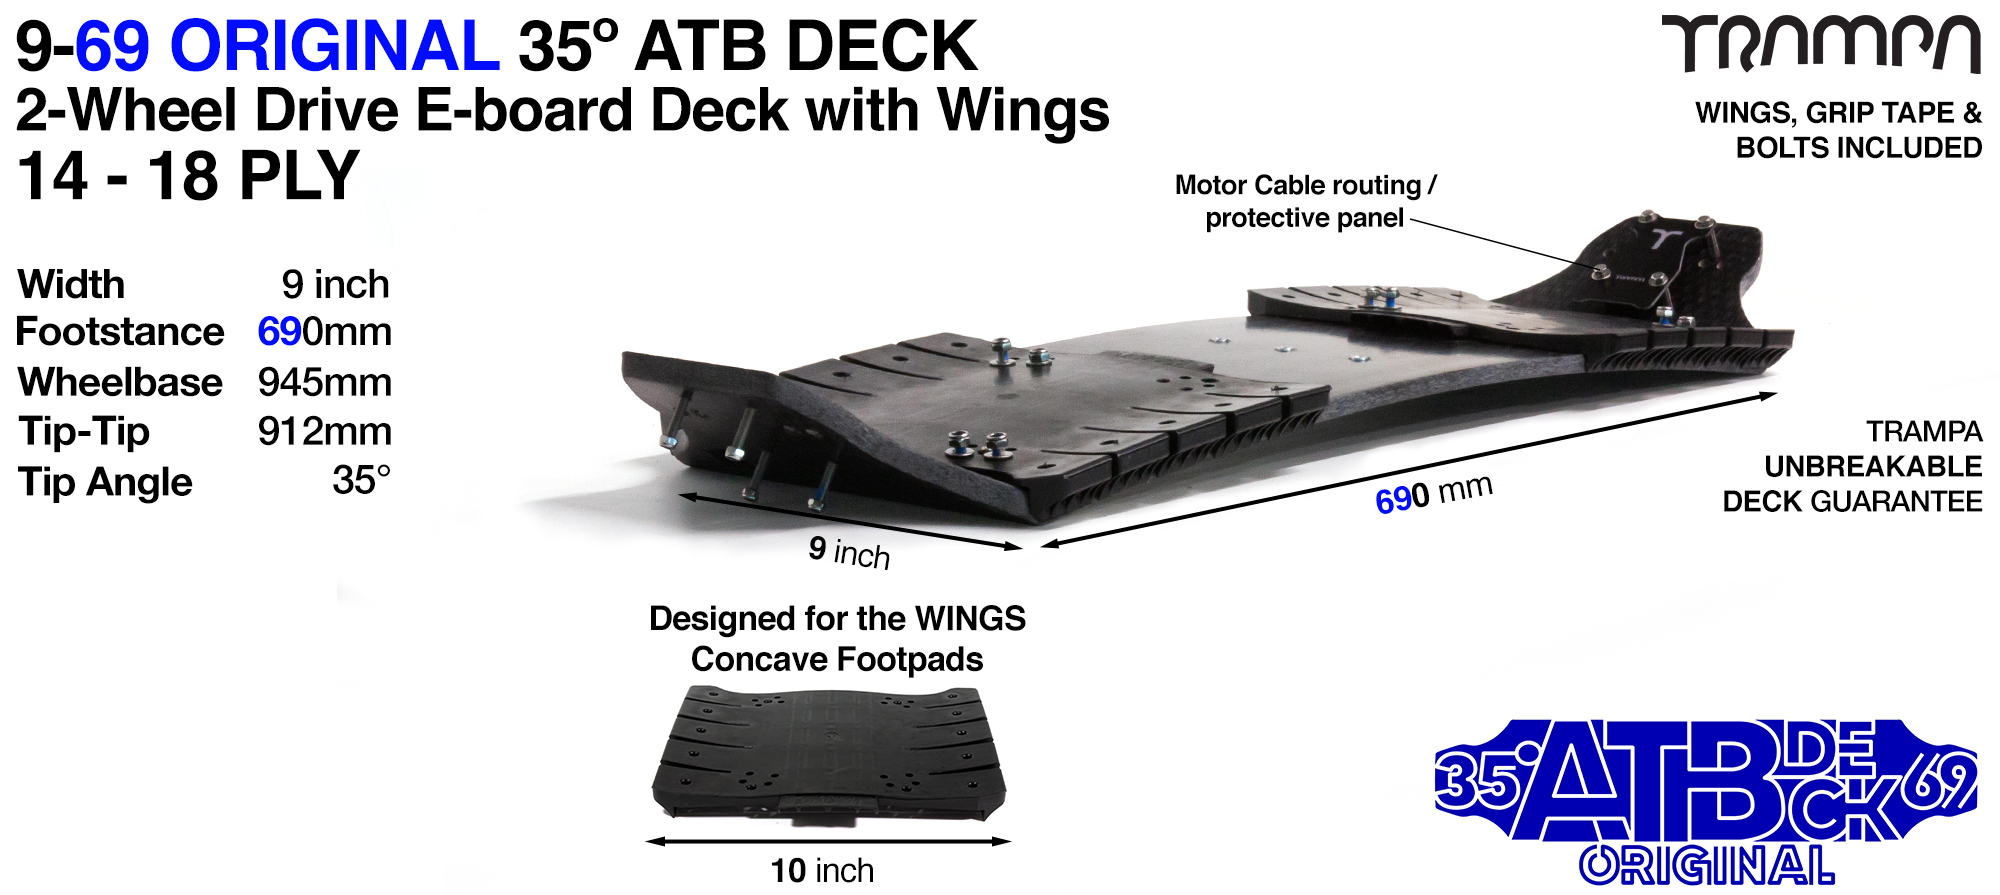 35° 9/69 2WD Mountainboard Deck with WINGS  (£250)